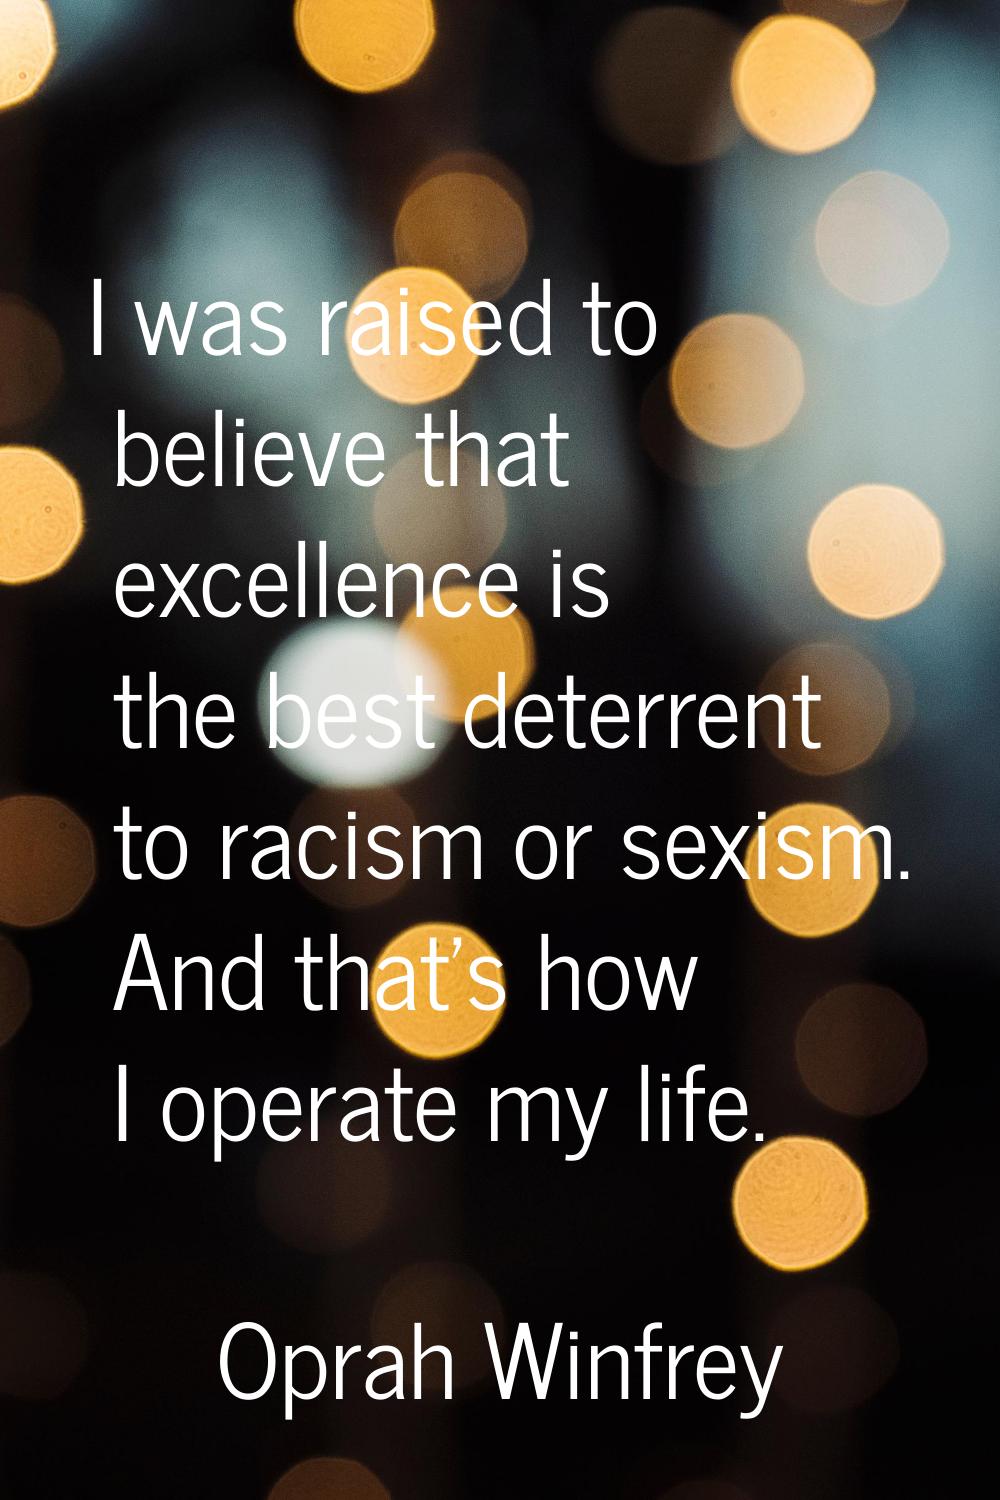 I was raised to believe that excellence is the best deterrent to racism or sexism. And that's how I